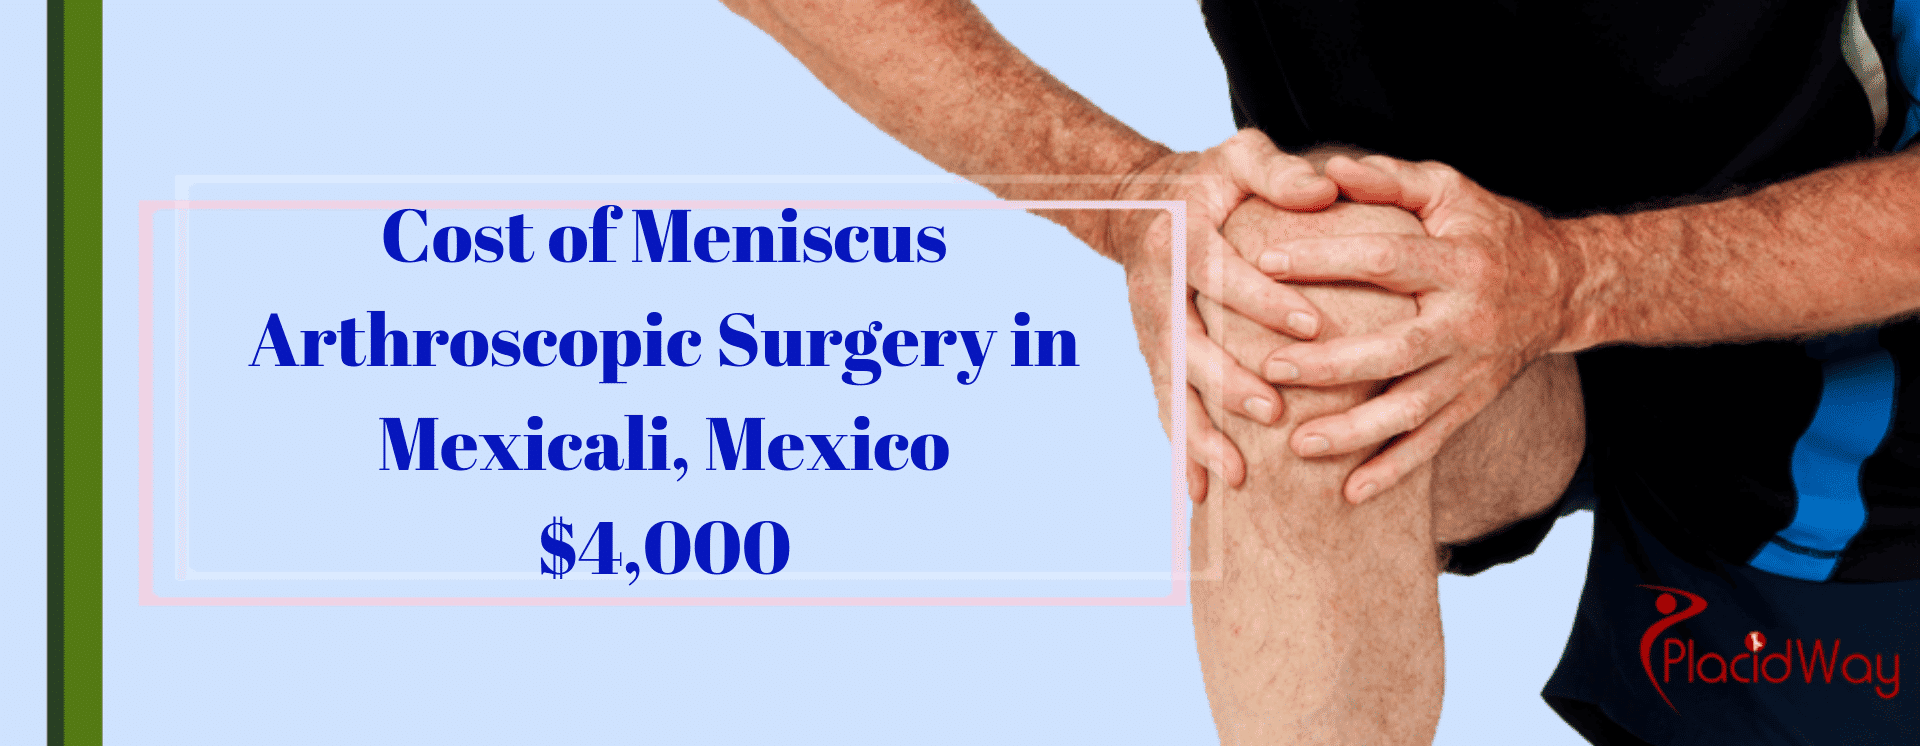 Cost of Meniscus Arthoscopic Surgery in Mexicali, Mexico